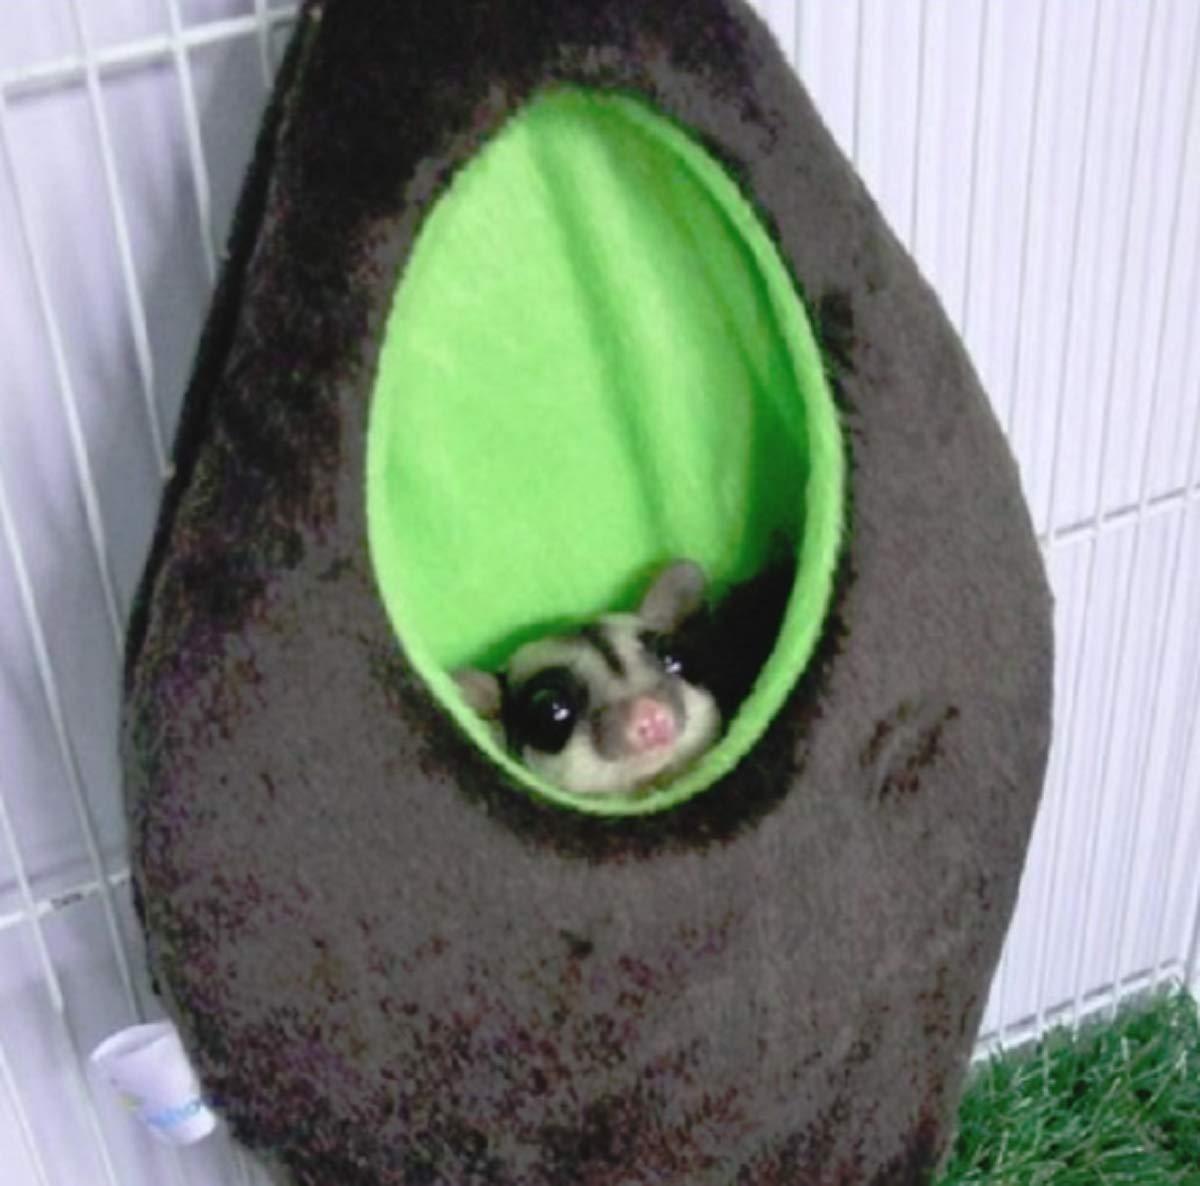 HOT 1 Pcs Forest Hanging Oval/Egg Shape Bed Sugar Glider Hamster Squirrel Chinchillas Small Pet Cage Dark Brown Color by Polar Bear\\\'s